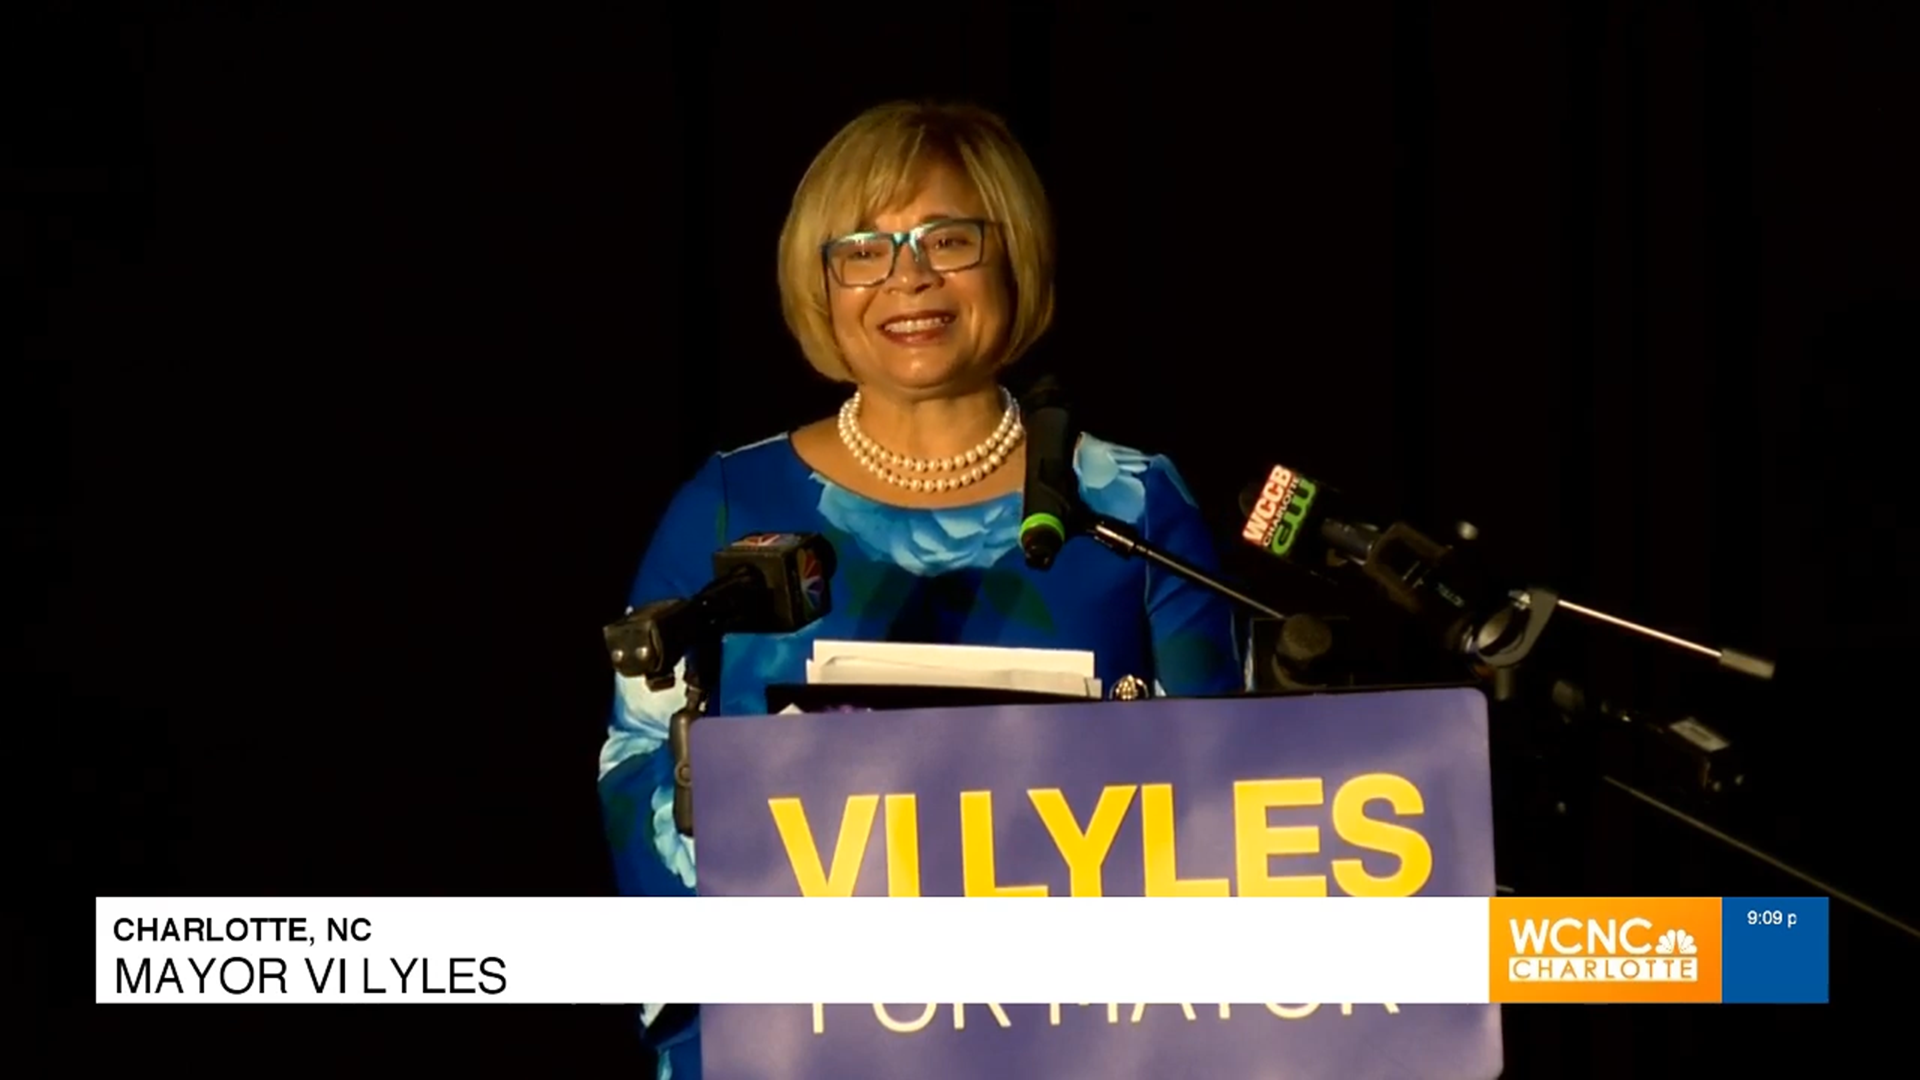 Current Charlotte Mayor Vi Lyles is claiming victory in the democratic primary for mayor. She will go against one republican candidate for the office in November.